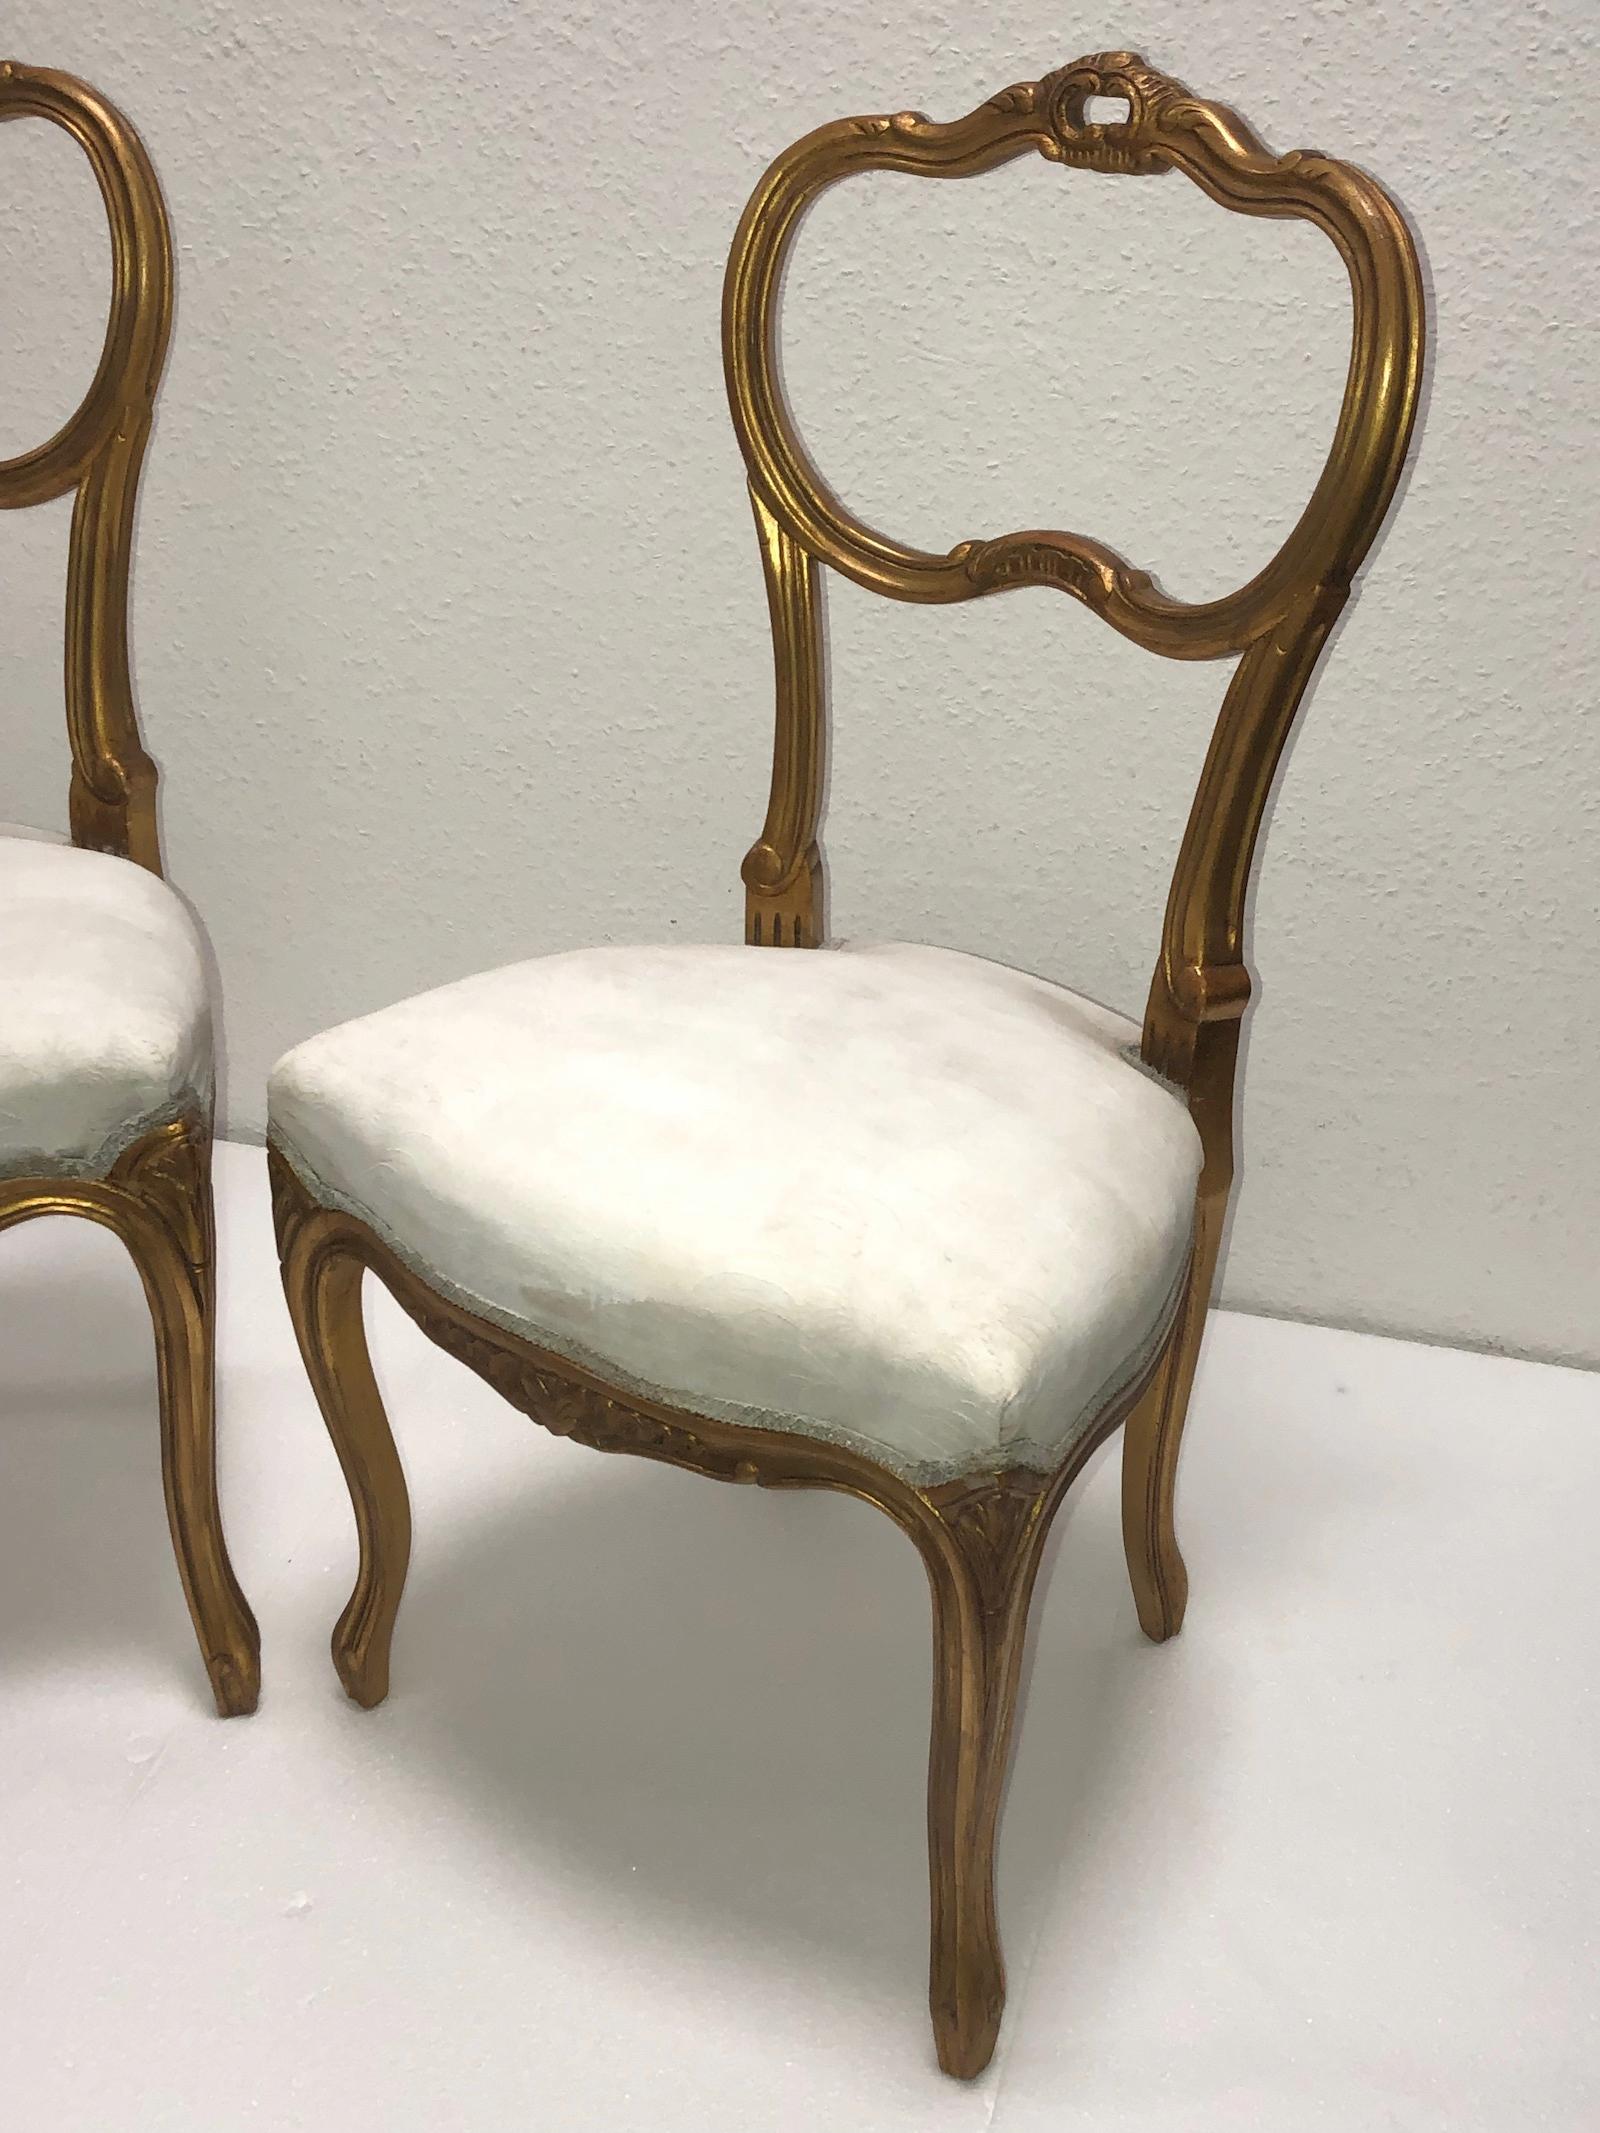 1920 chairs styles